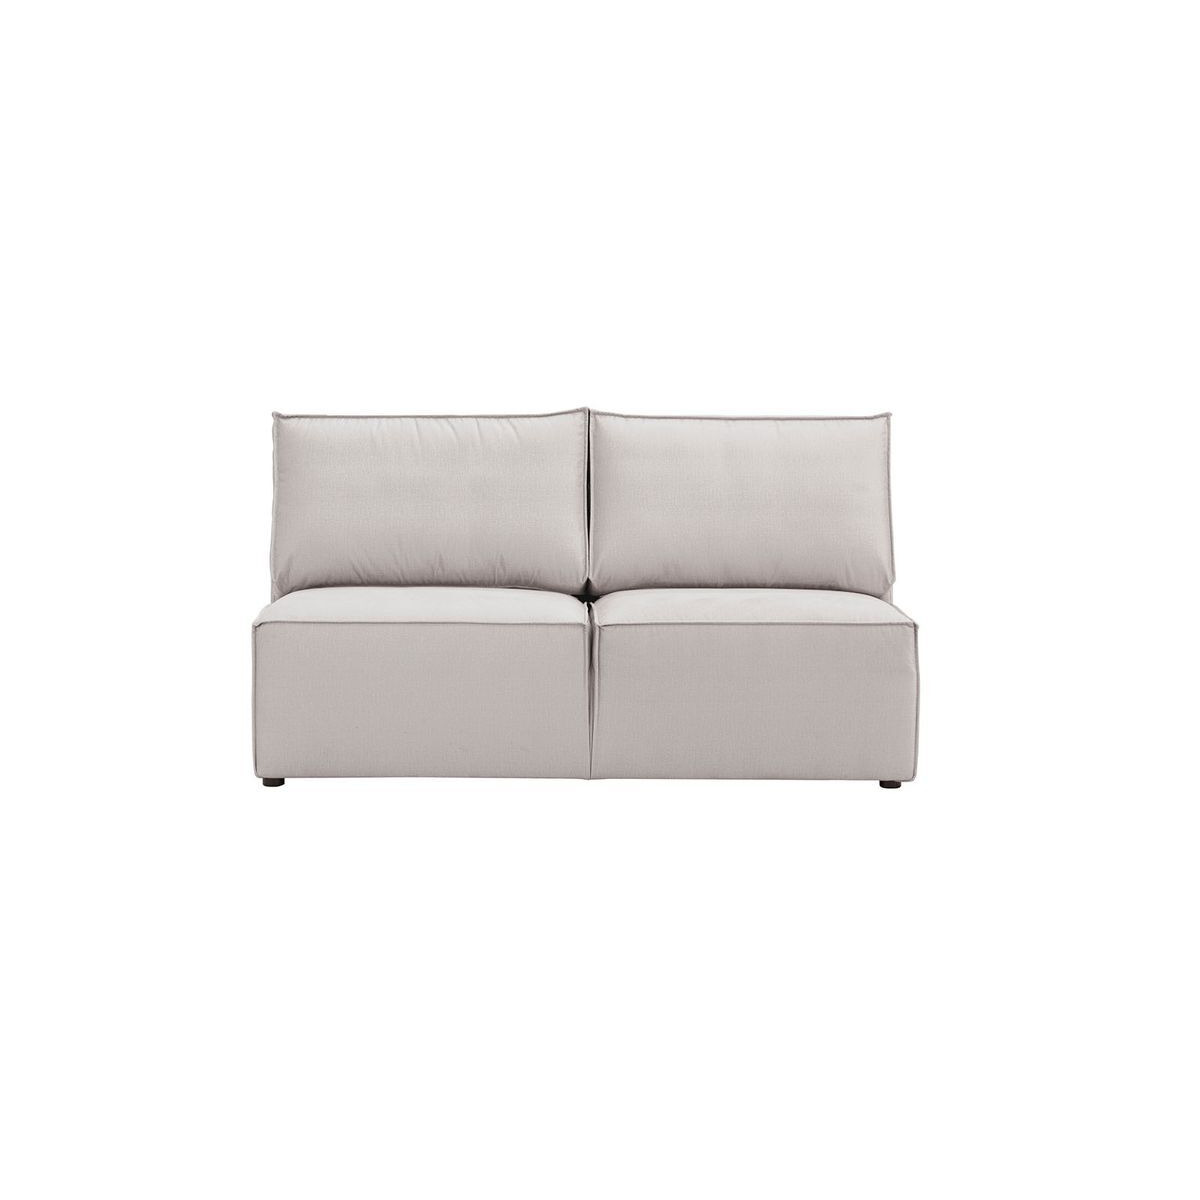 Charles 2 Seater Modular Unit (2CP), silver - image 1